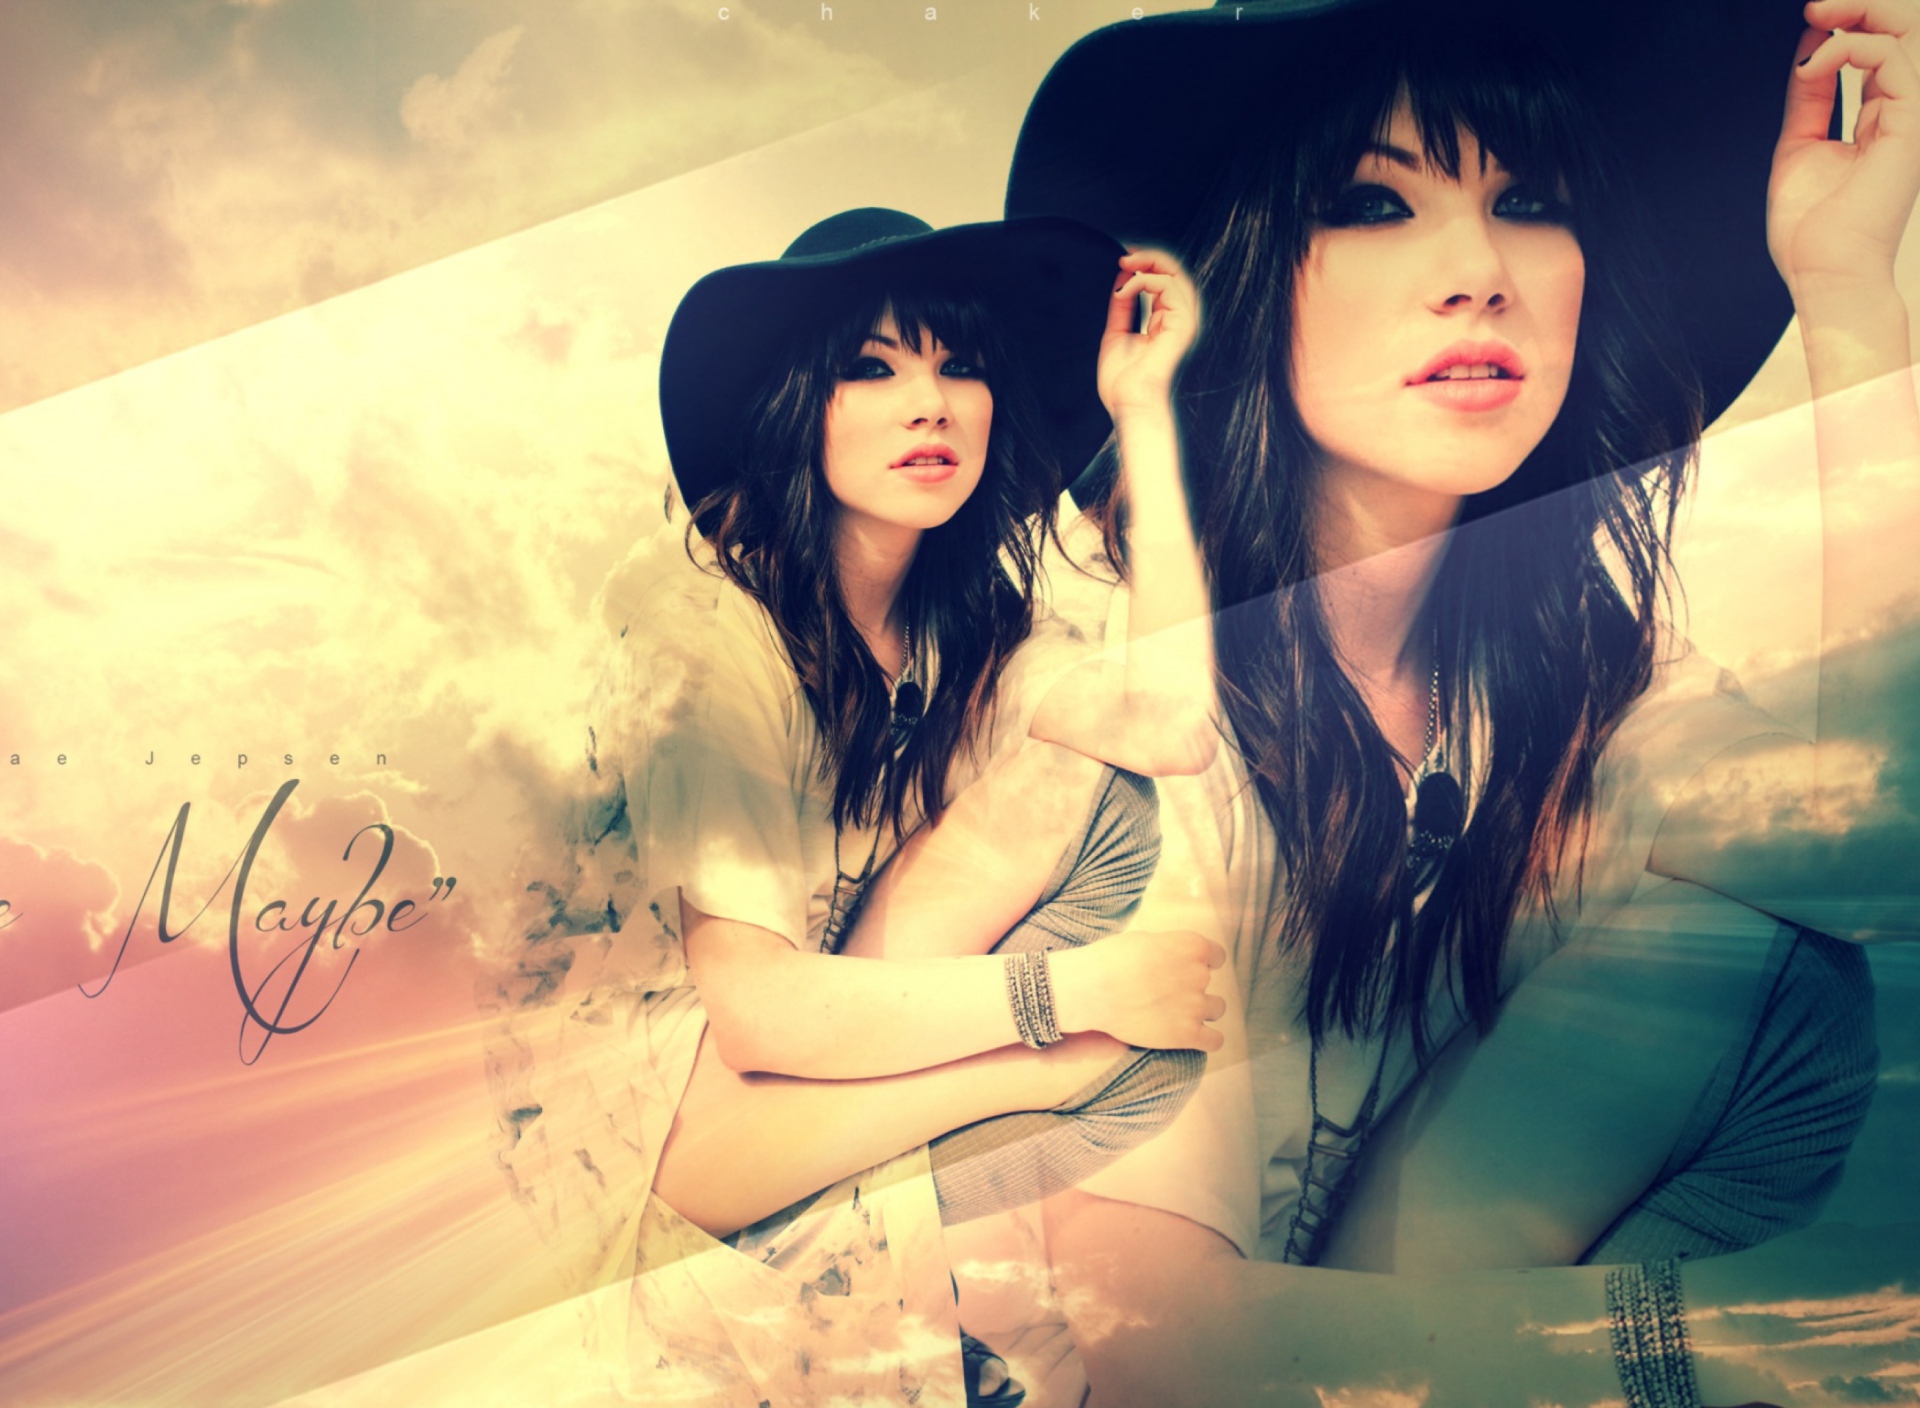 Carly Rae Jepsen - Call Me Maybe wallpaper 1920x1408